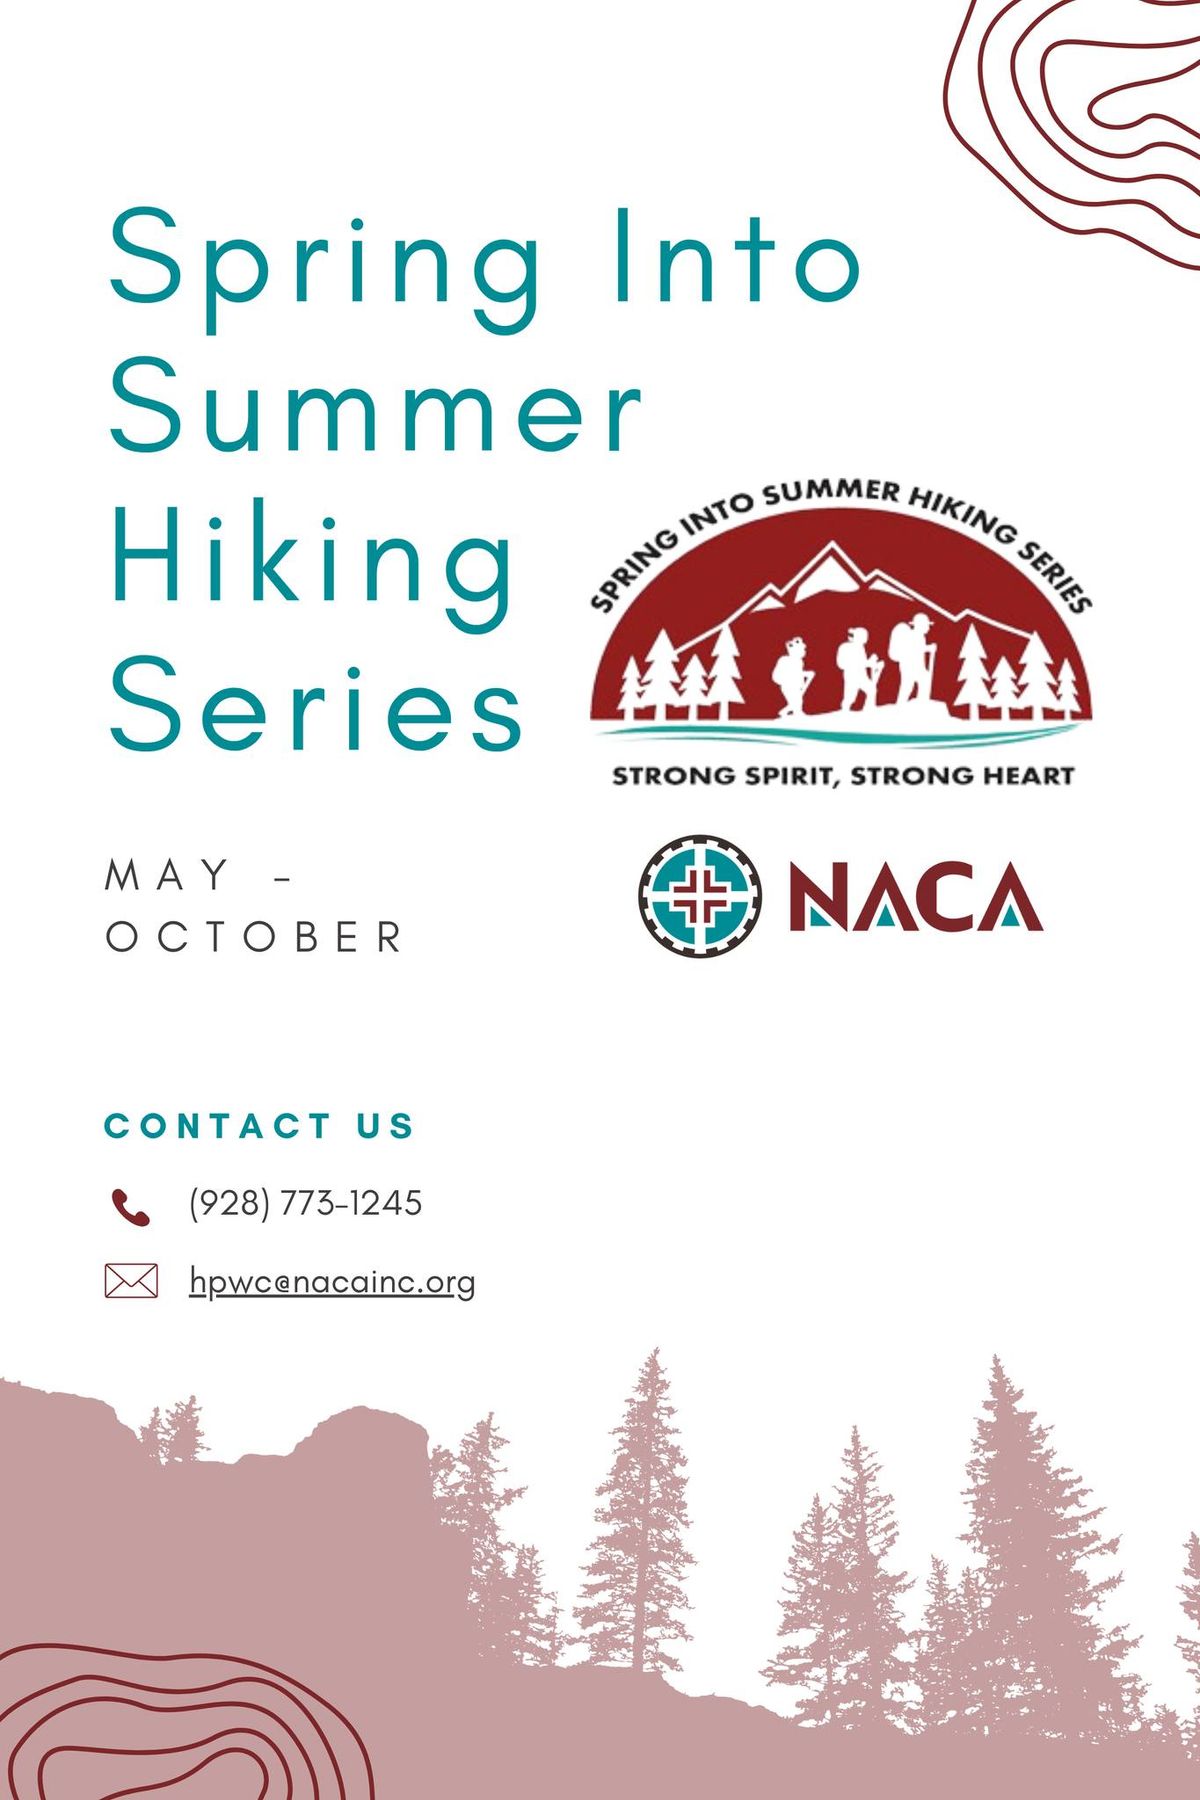 Spring Into Summer Hiking Series - Hike Three